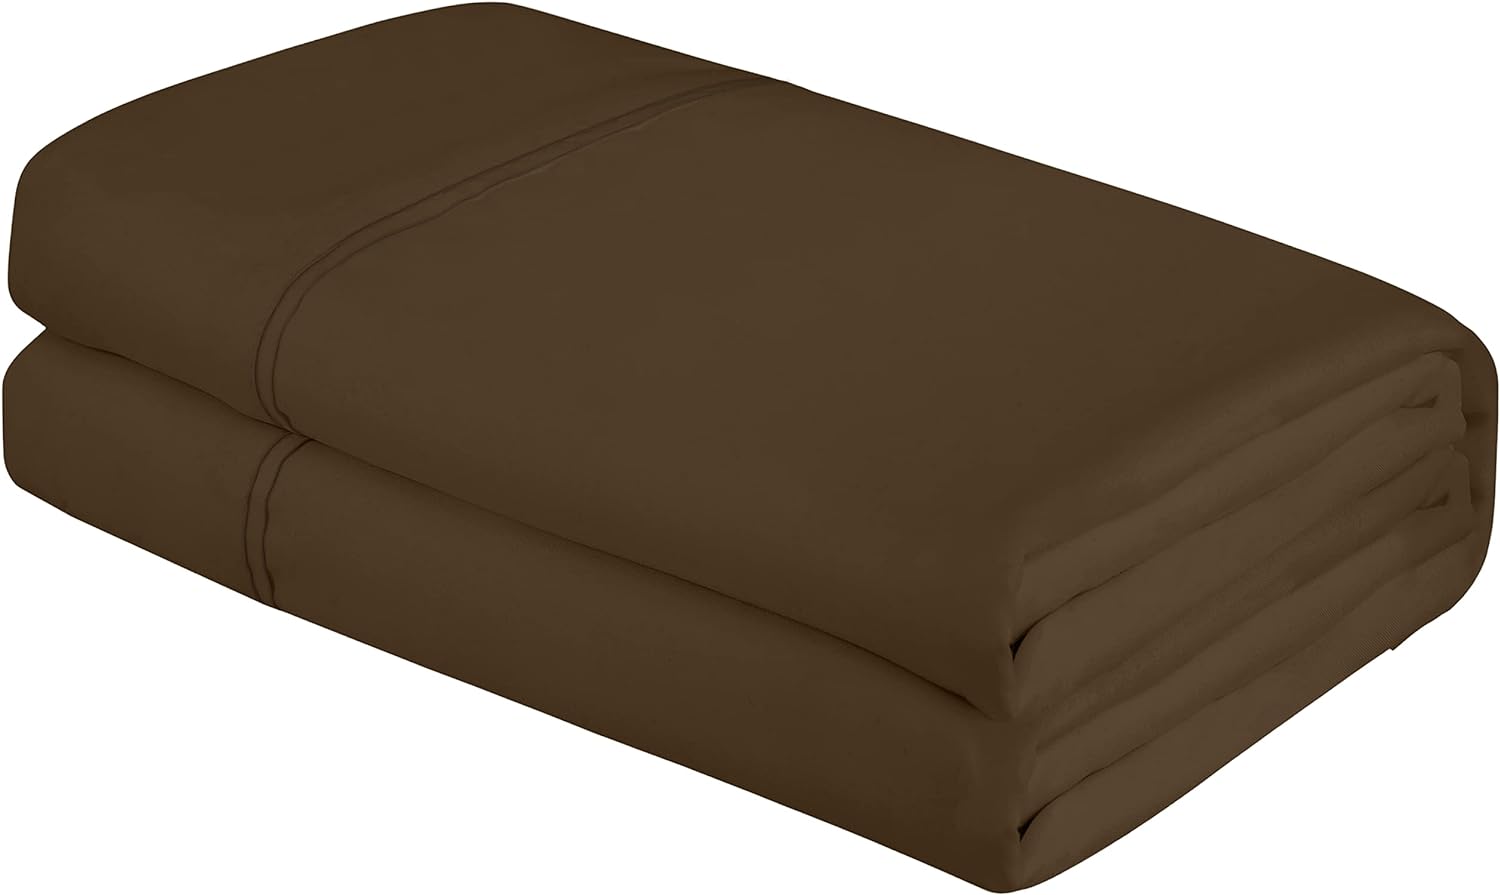 Royale Linens Full Size Flat Sheet Only - Brushed 1800 Microfiber - Ultra Soft & Breathable - Wrinkle & Stain Resistant - Hotel Quality Flat Sheet Sold Separately - Top Sheet for Bed (Full,Chocolate)